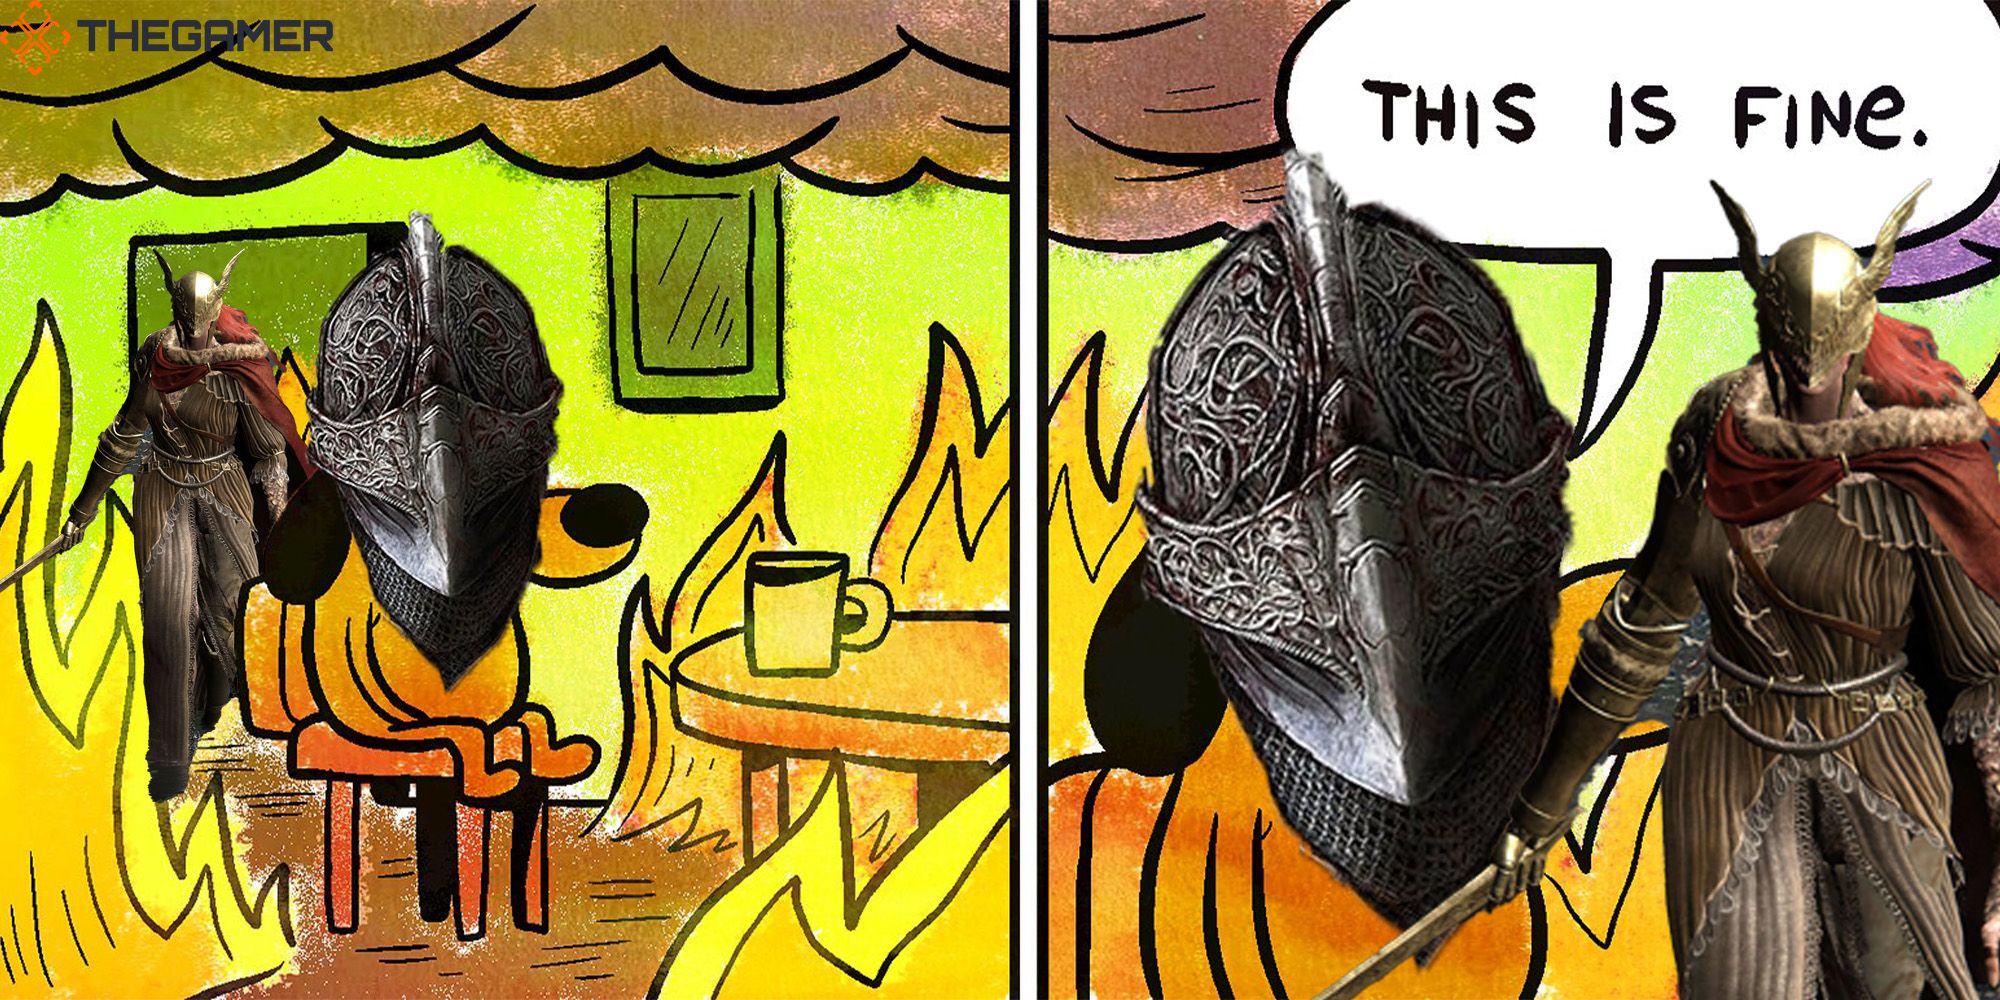 The "This Is Fine" meme, but the dog sitting at the table with coffee is getting stalked by Malenia from Elden Ring.